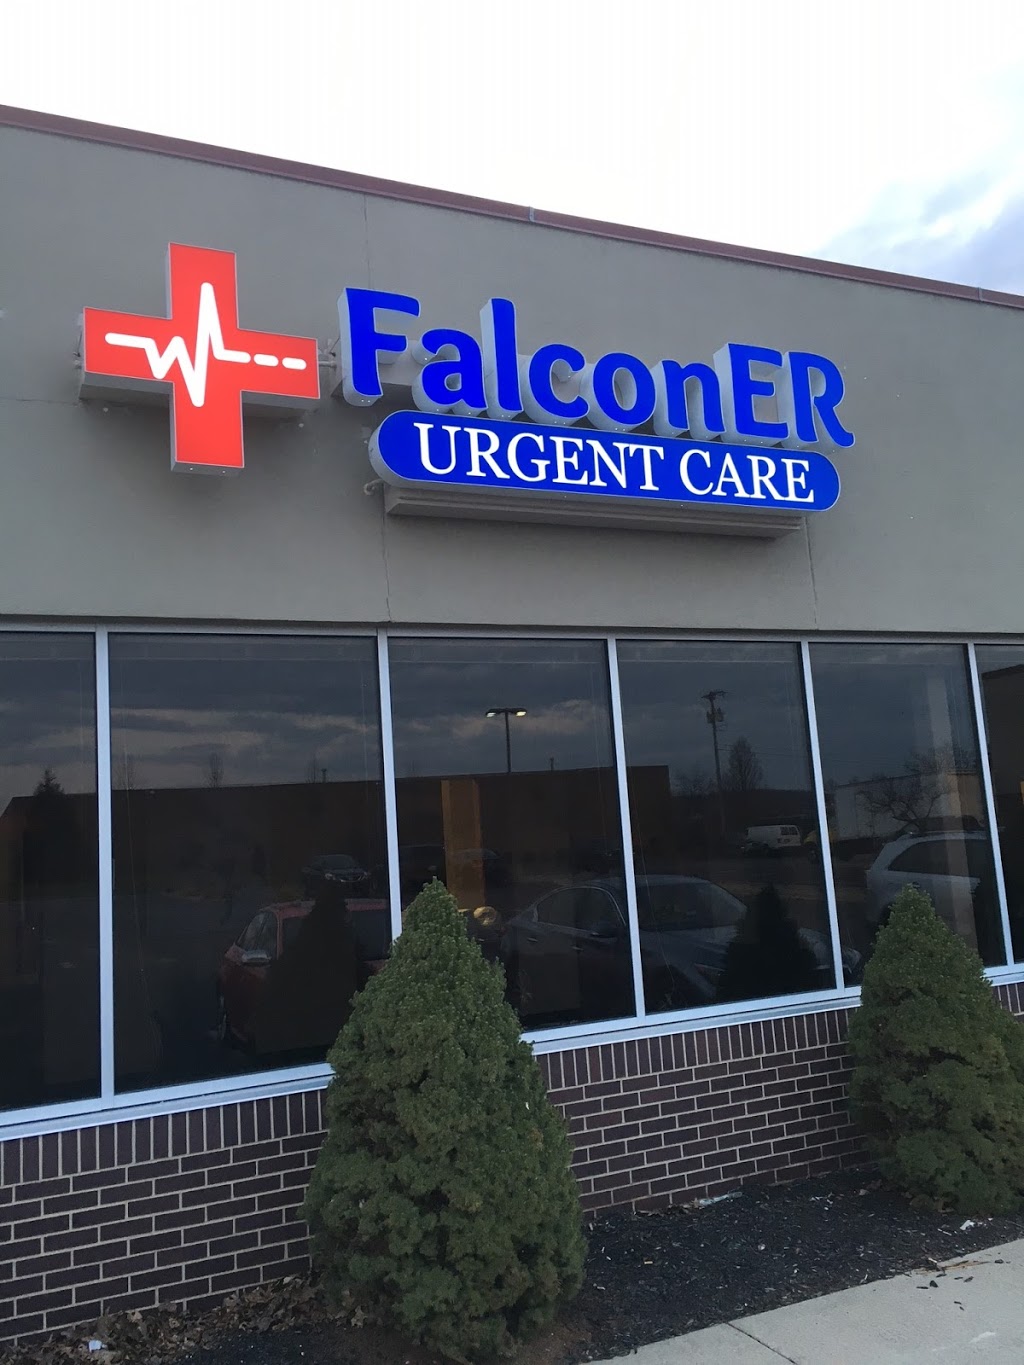 FalconER Urgent Care | 1241 Freedom Rd, Cranberry Twp, PA 16066 | Phone: (724) 235-6000